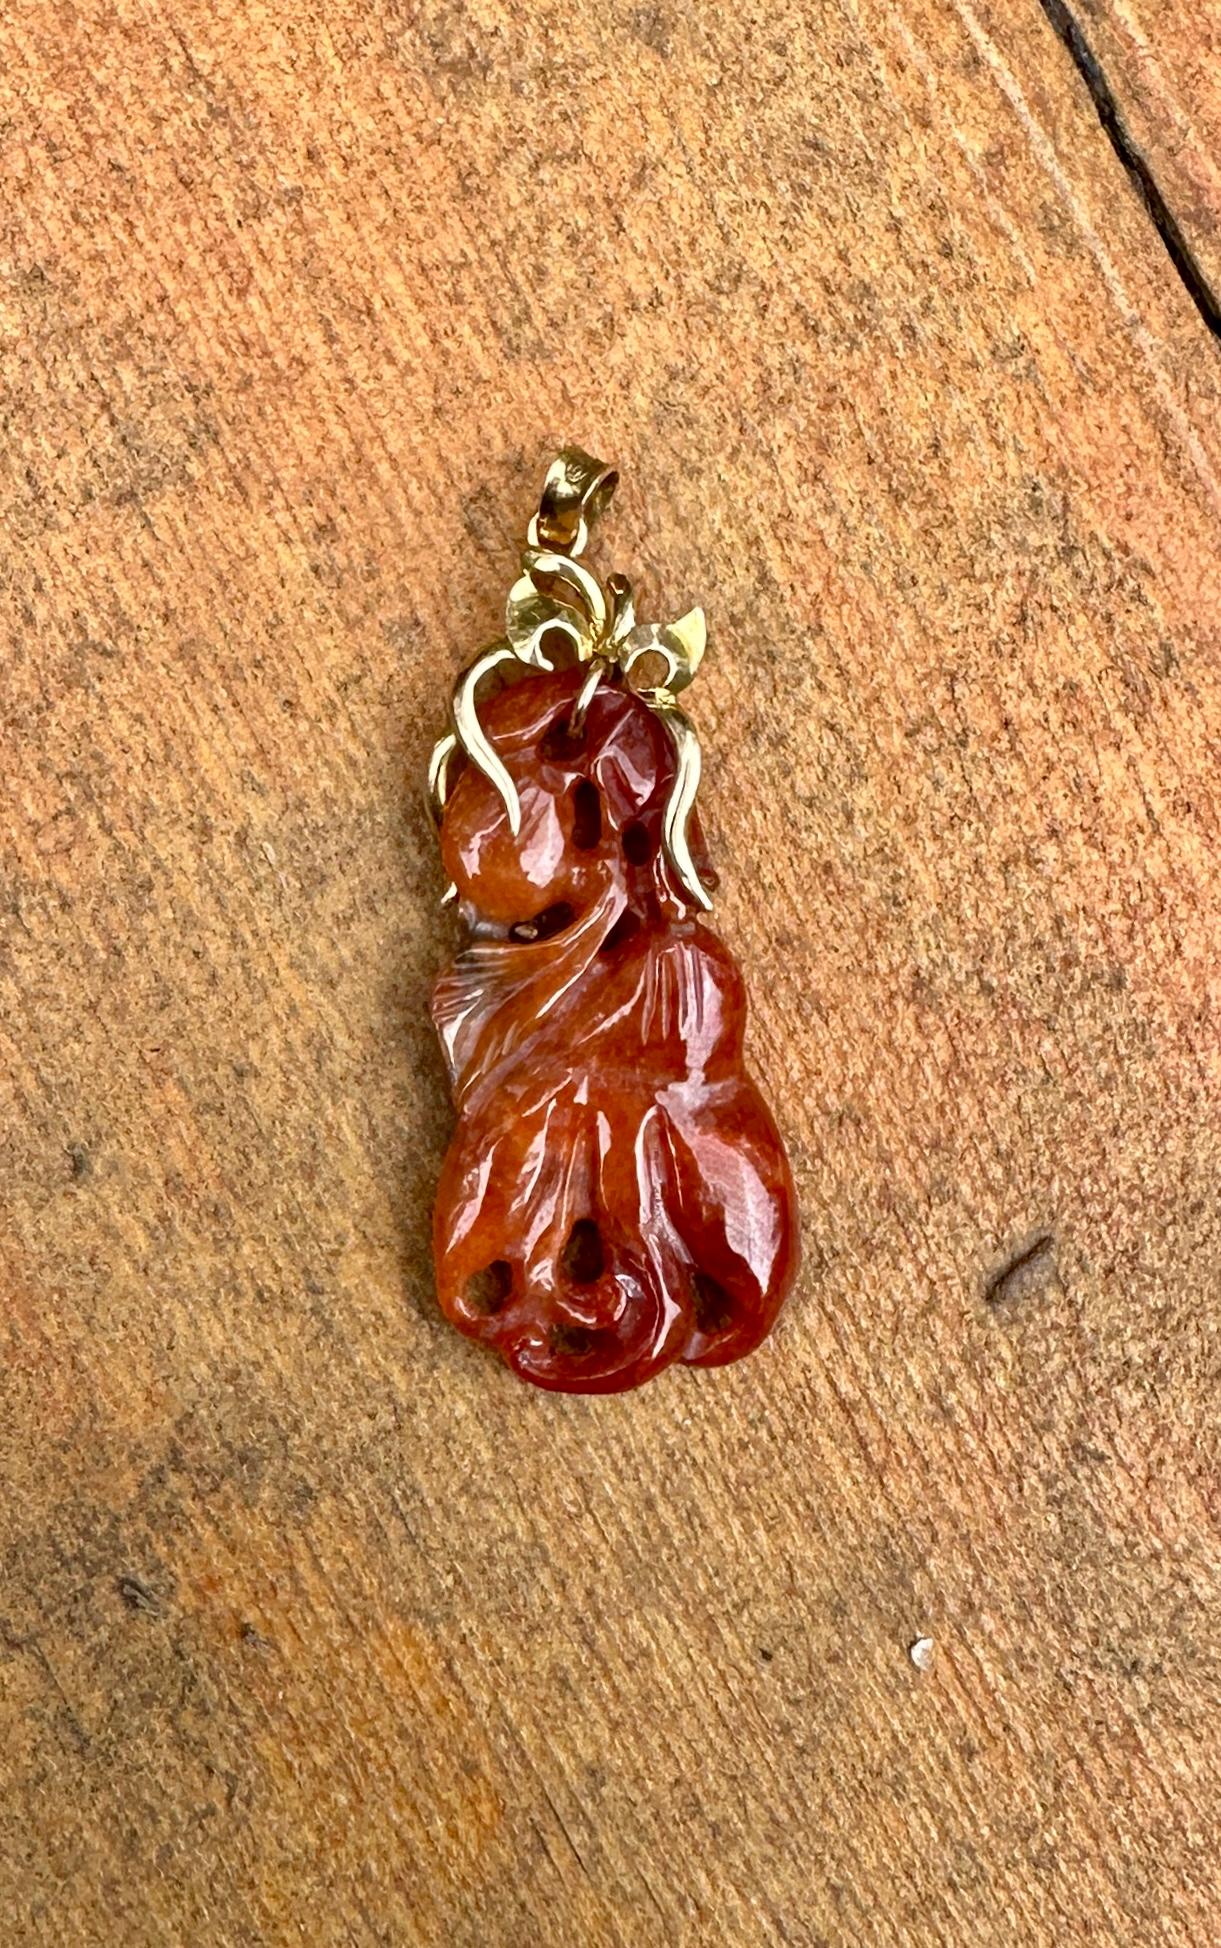 Rare Red Jade Pendant Flower Motif Necklace 14 Karat Gold Carved Antique In Excellent Condition For Sale In New York, NY